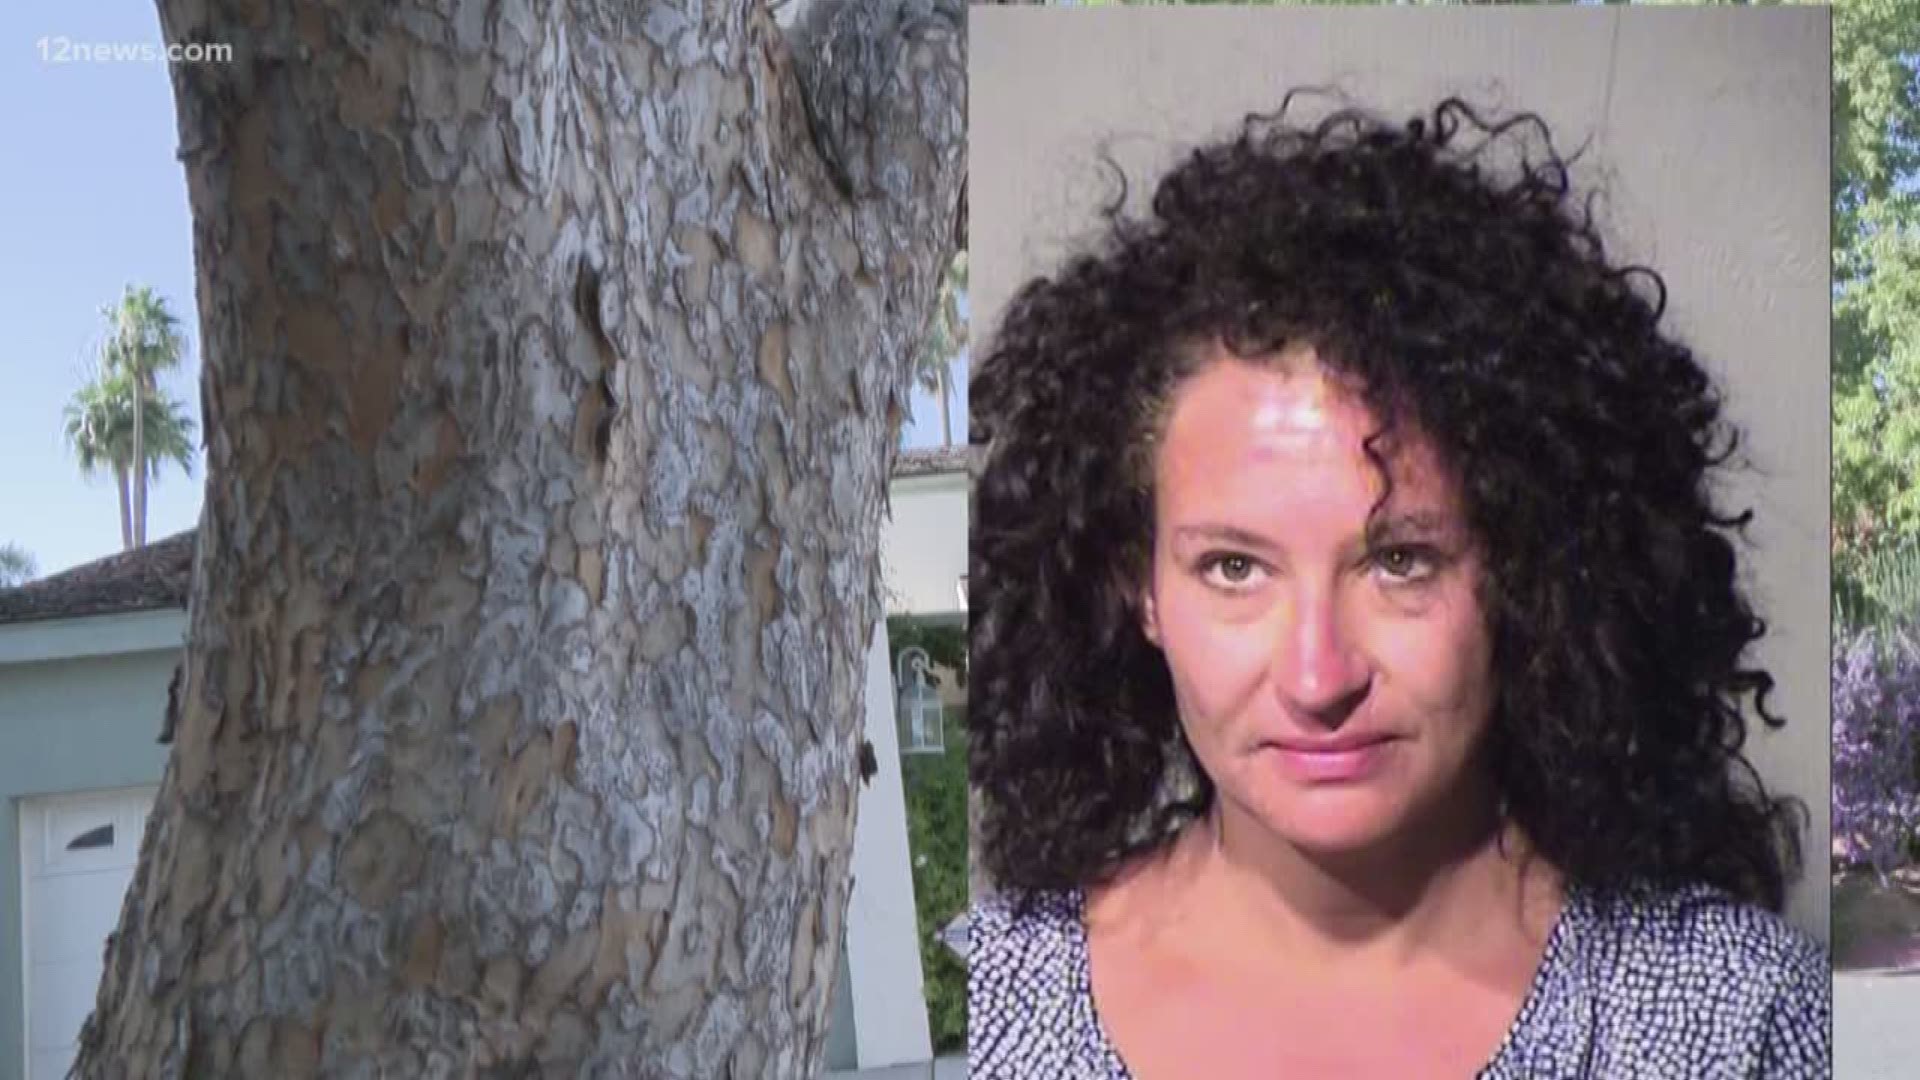 The intruder had made herself at home, and Phoenix police say she was taking a shower when the homeowner and her son came home.